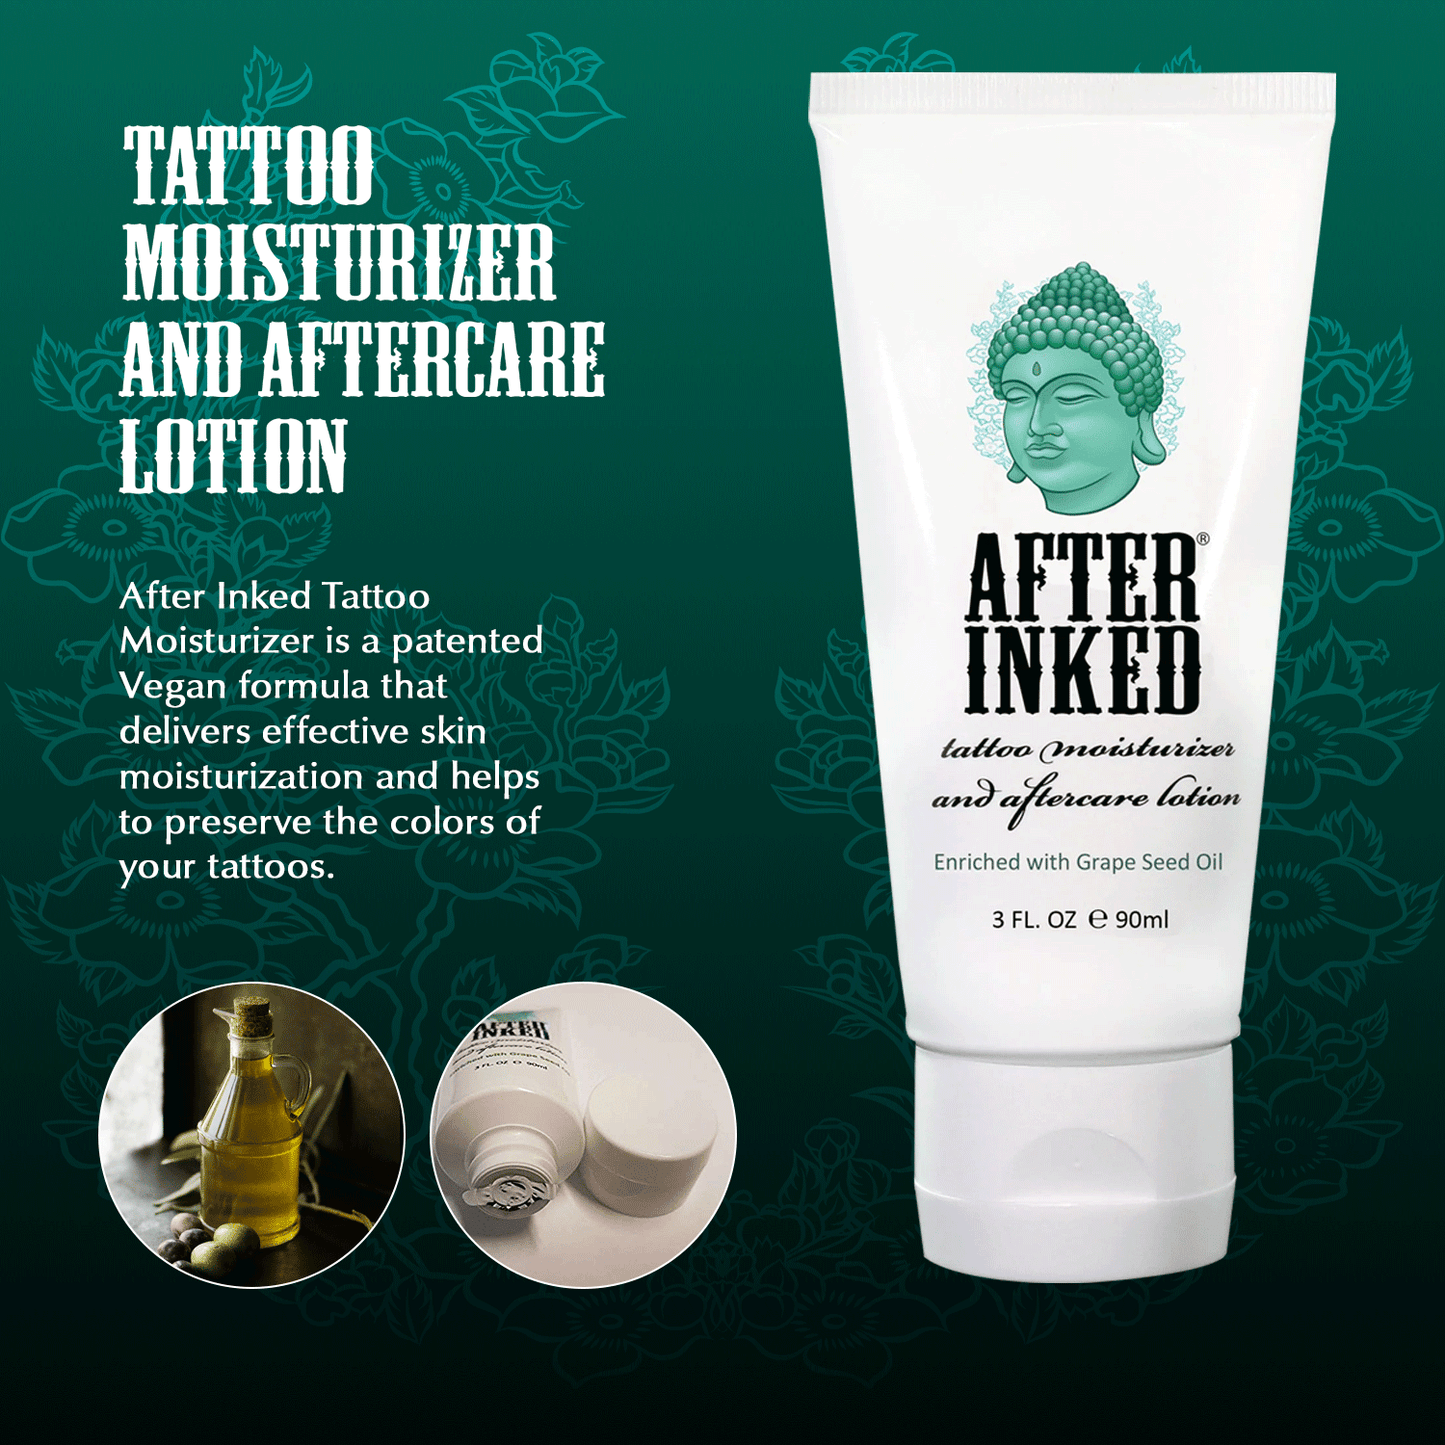 Tattoo moisturizer and aftercare lotion is a patented Vegan formula that delivers effective skin moisturization and helps to preserve the colors of your tattoos. Enriched with grape seed oil.